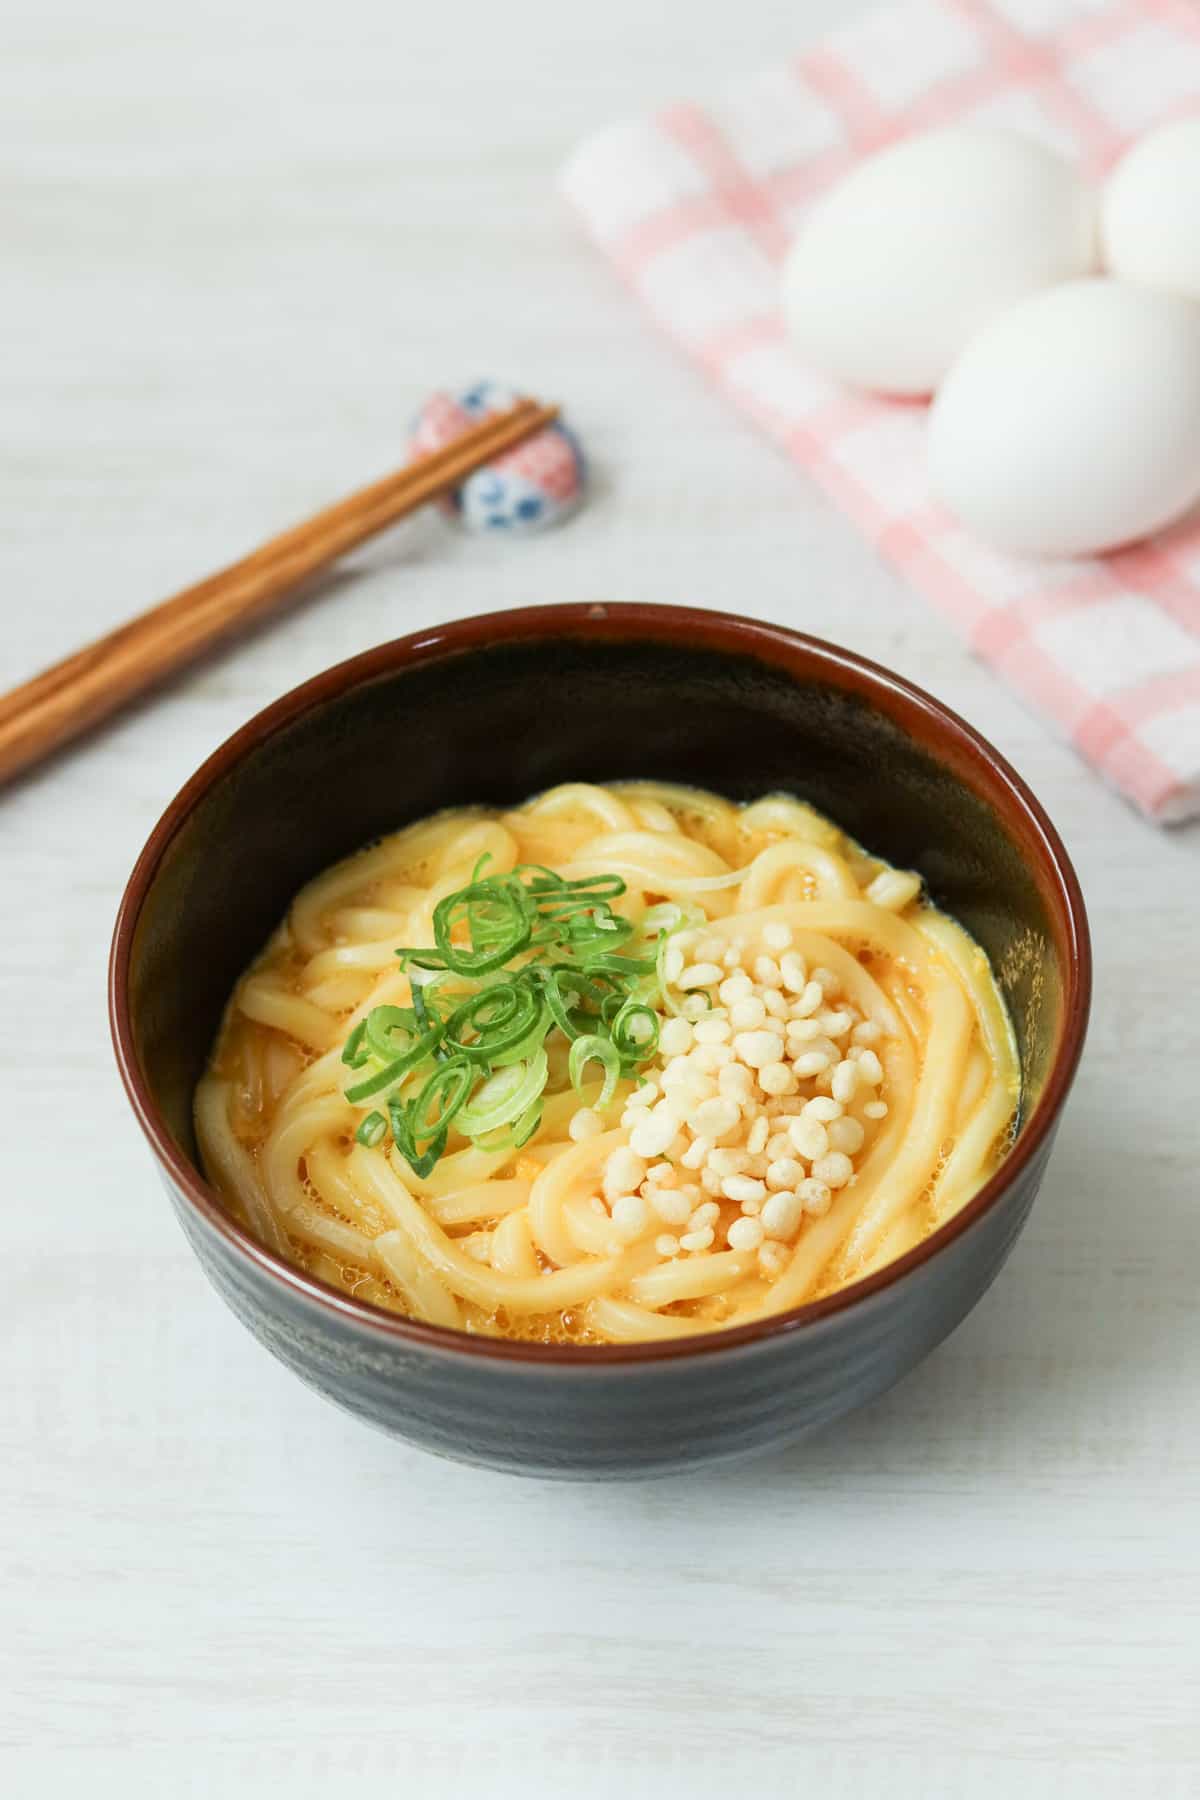 Kamatama Udon (udon noodles tossed with egg and dashi soy sauce)